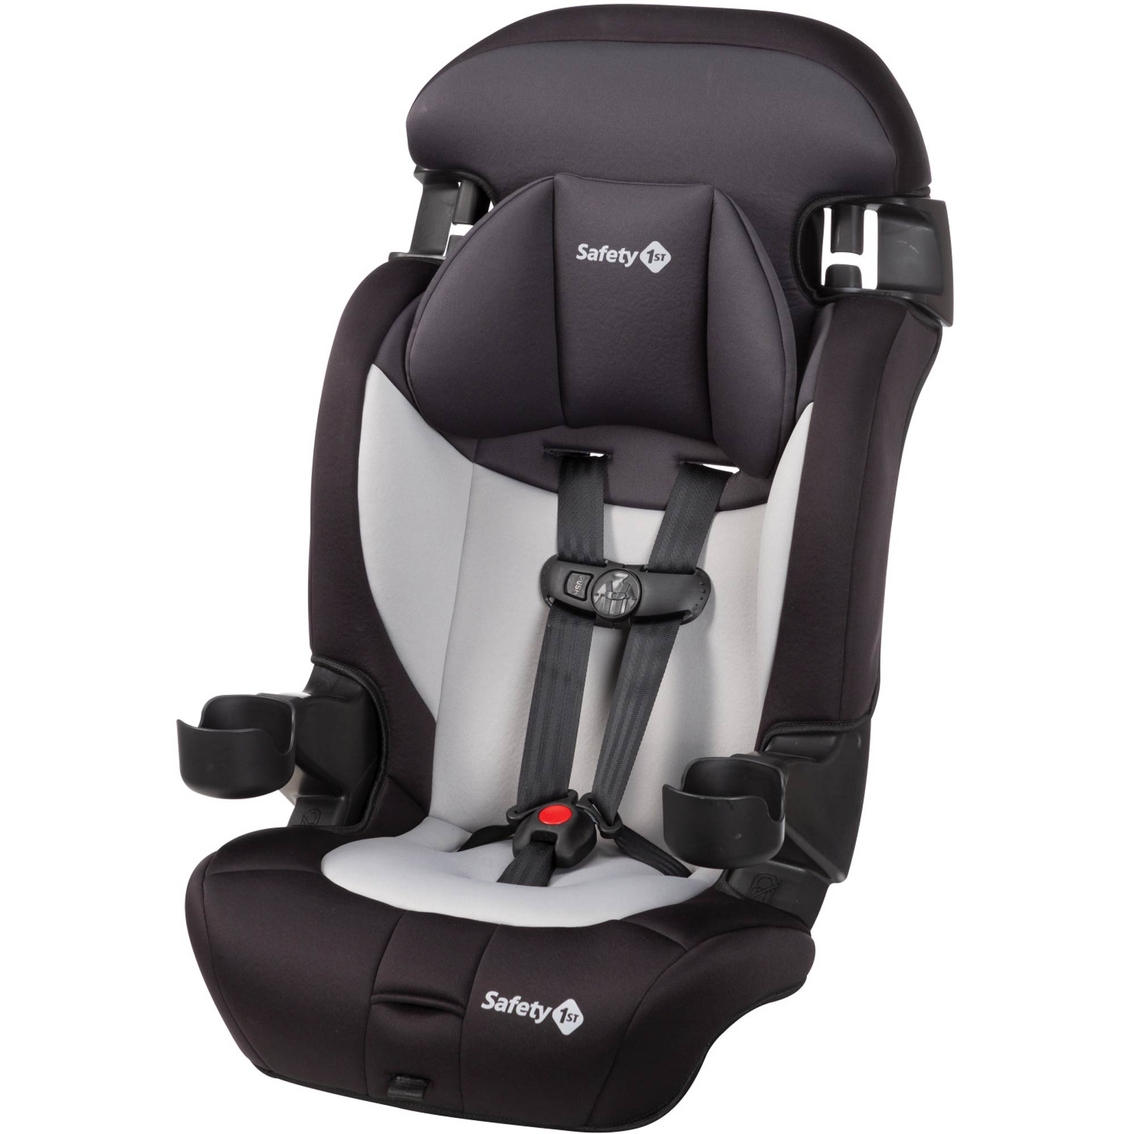 Safety 1st Grand 2 in 1 Booster Car Seat